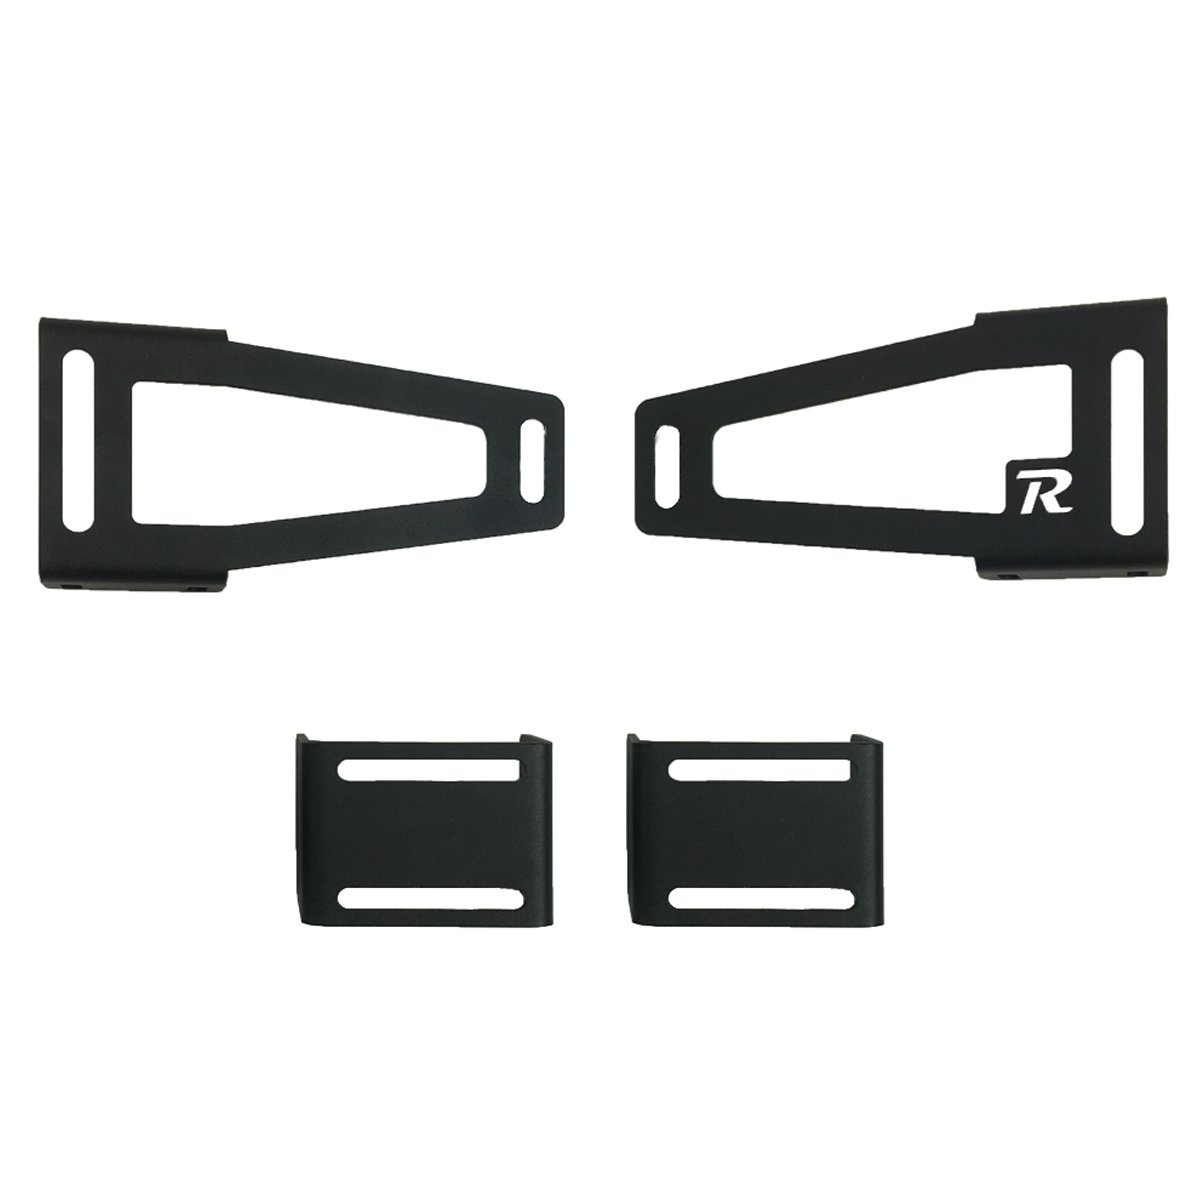 Rago 4RUNNER CANOPY/ AWNING MOUNTS FOR FACTORY ROOF RAIL (ships free)